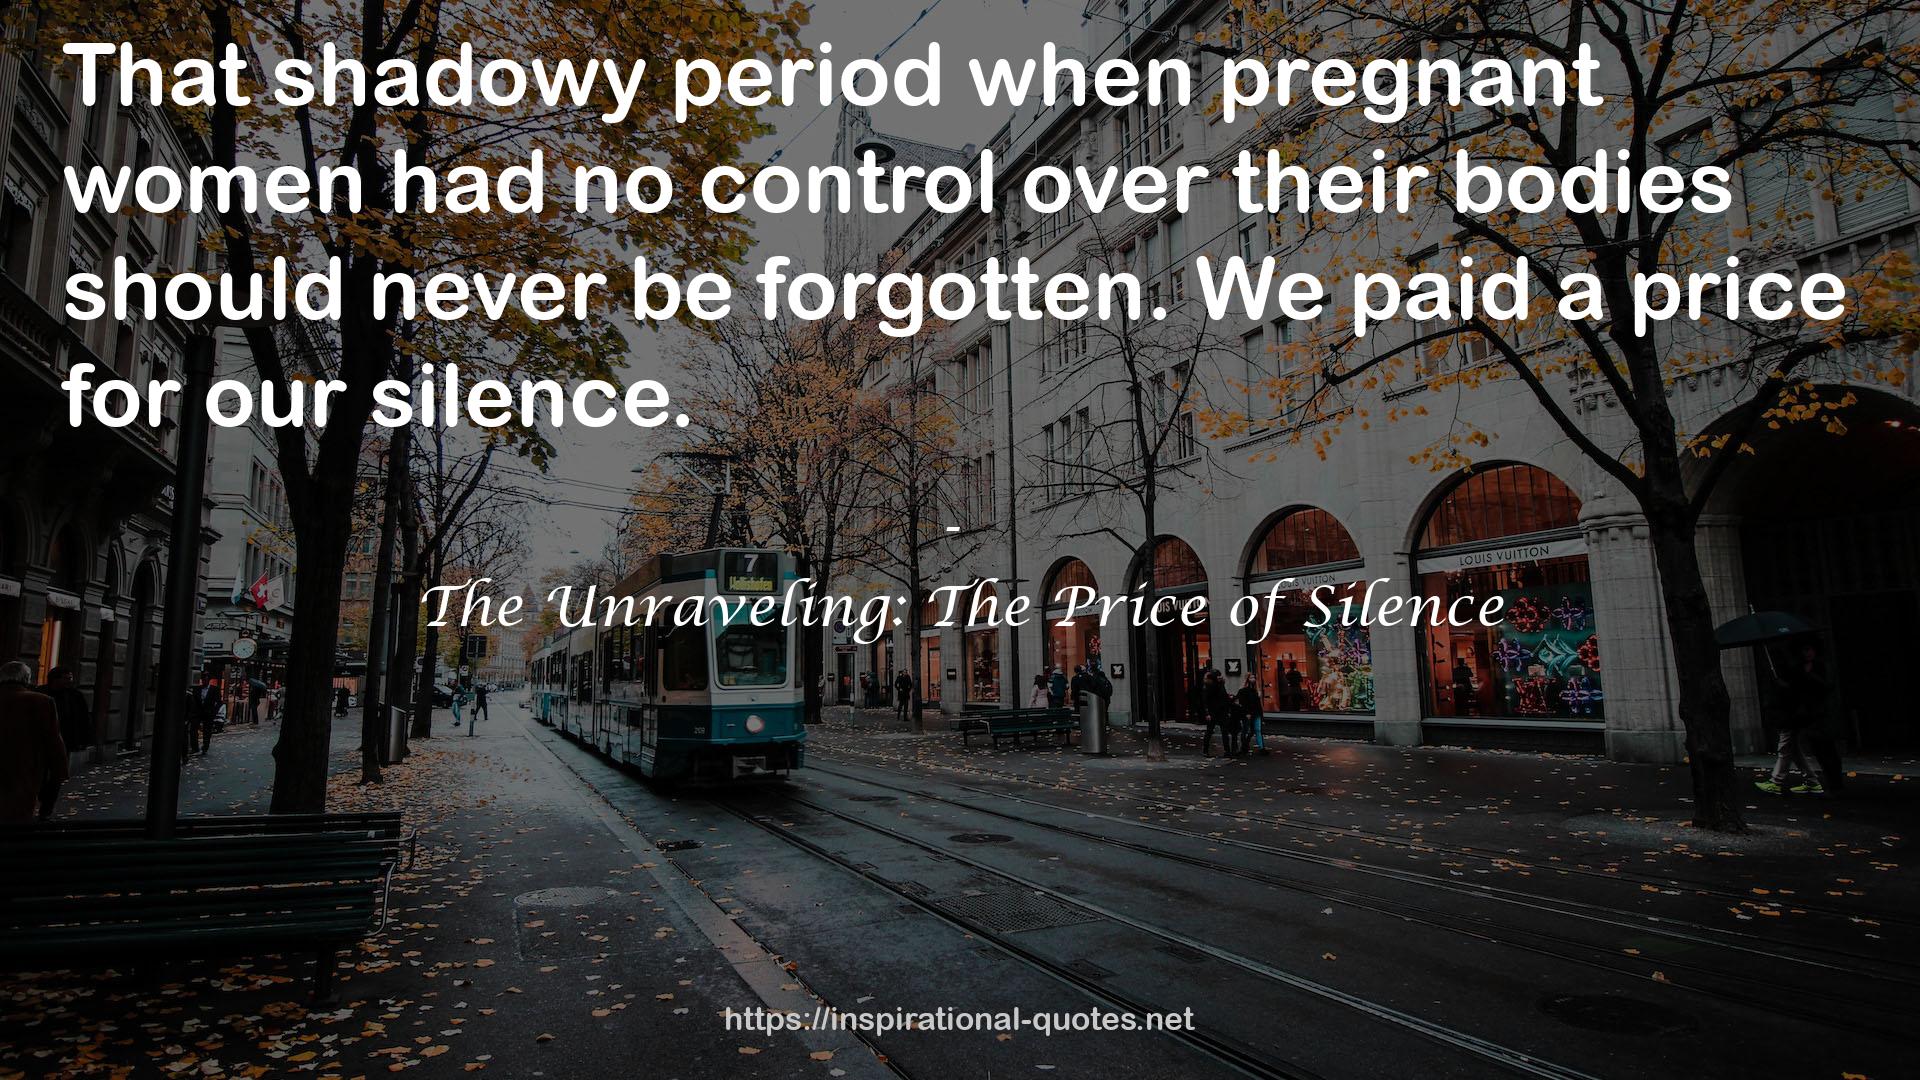 The Unraveling: The Price of Silence QUOTES